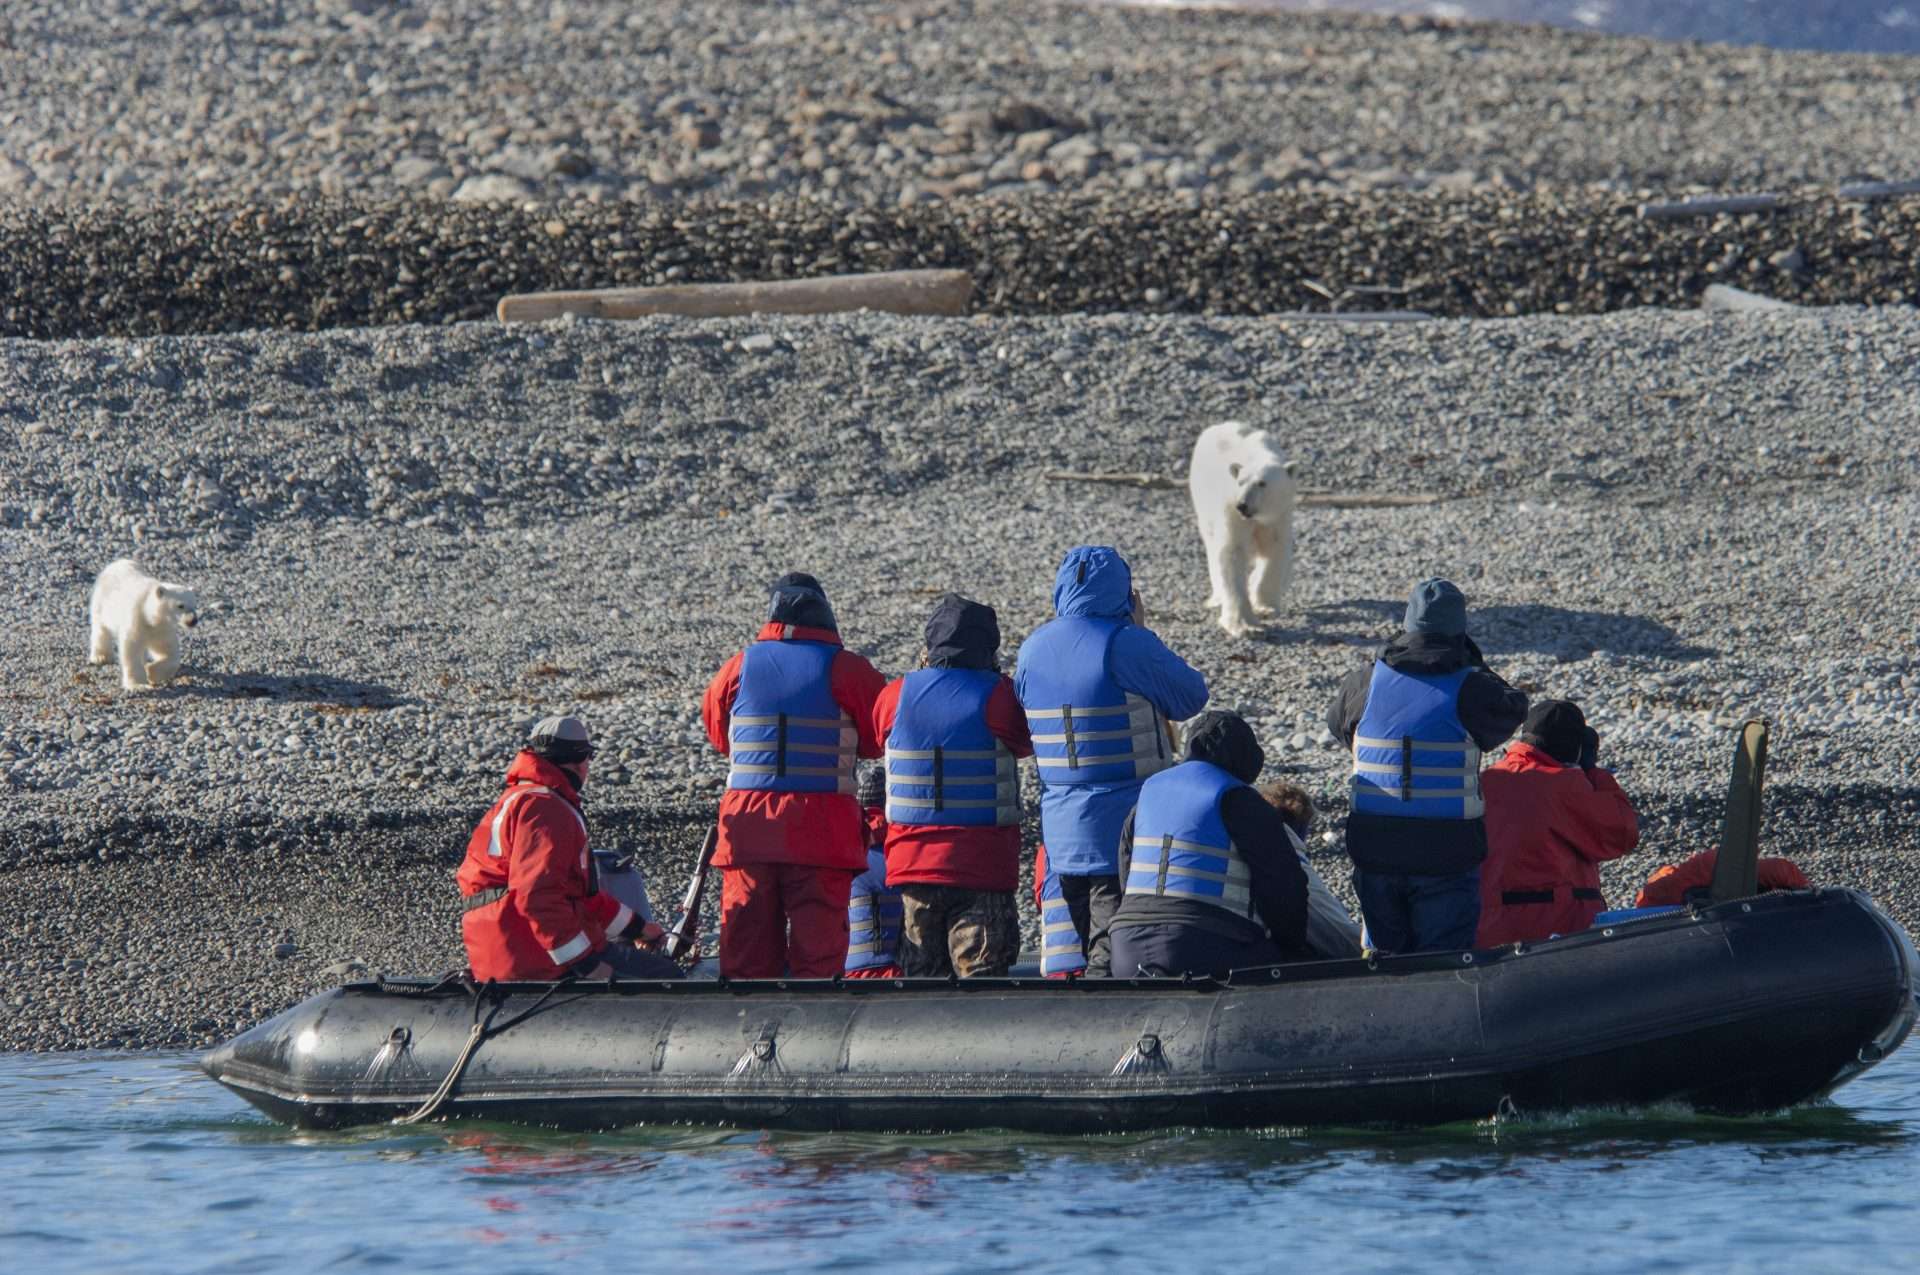 Boat of people in Alaska driving by coastline where mom and baby polar bear are.